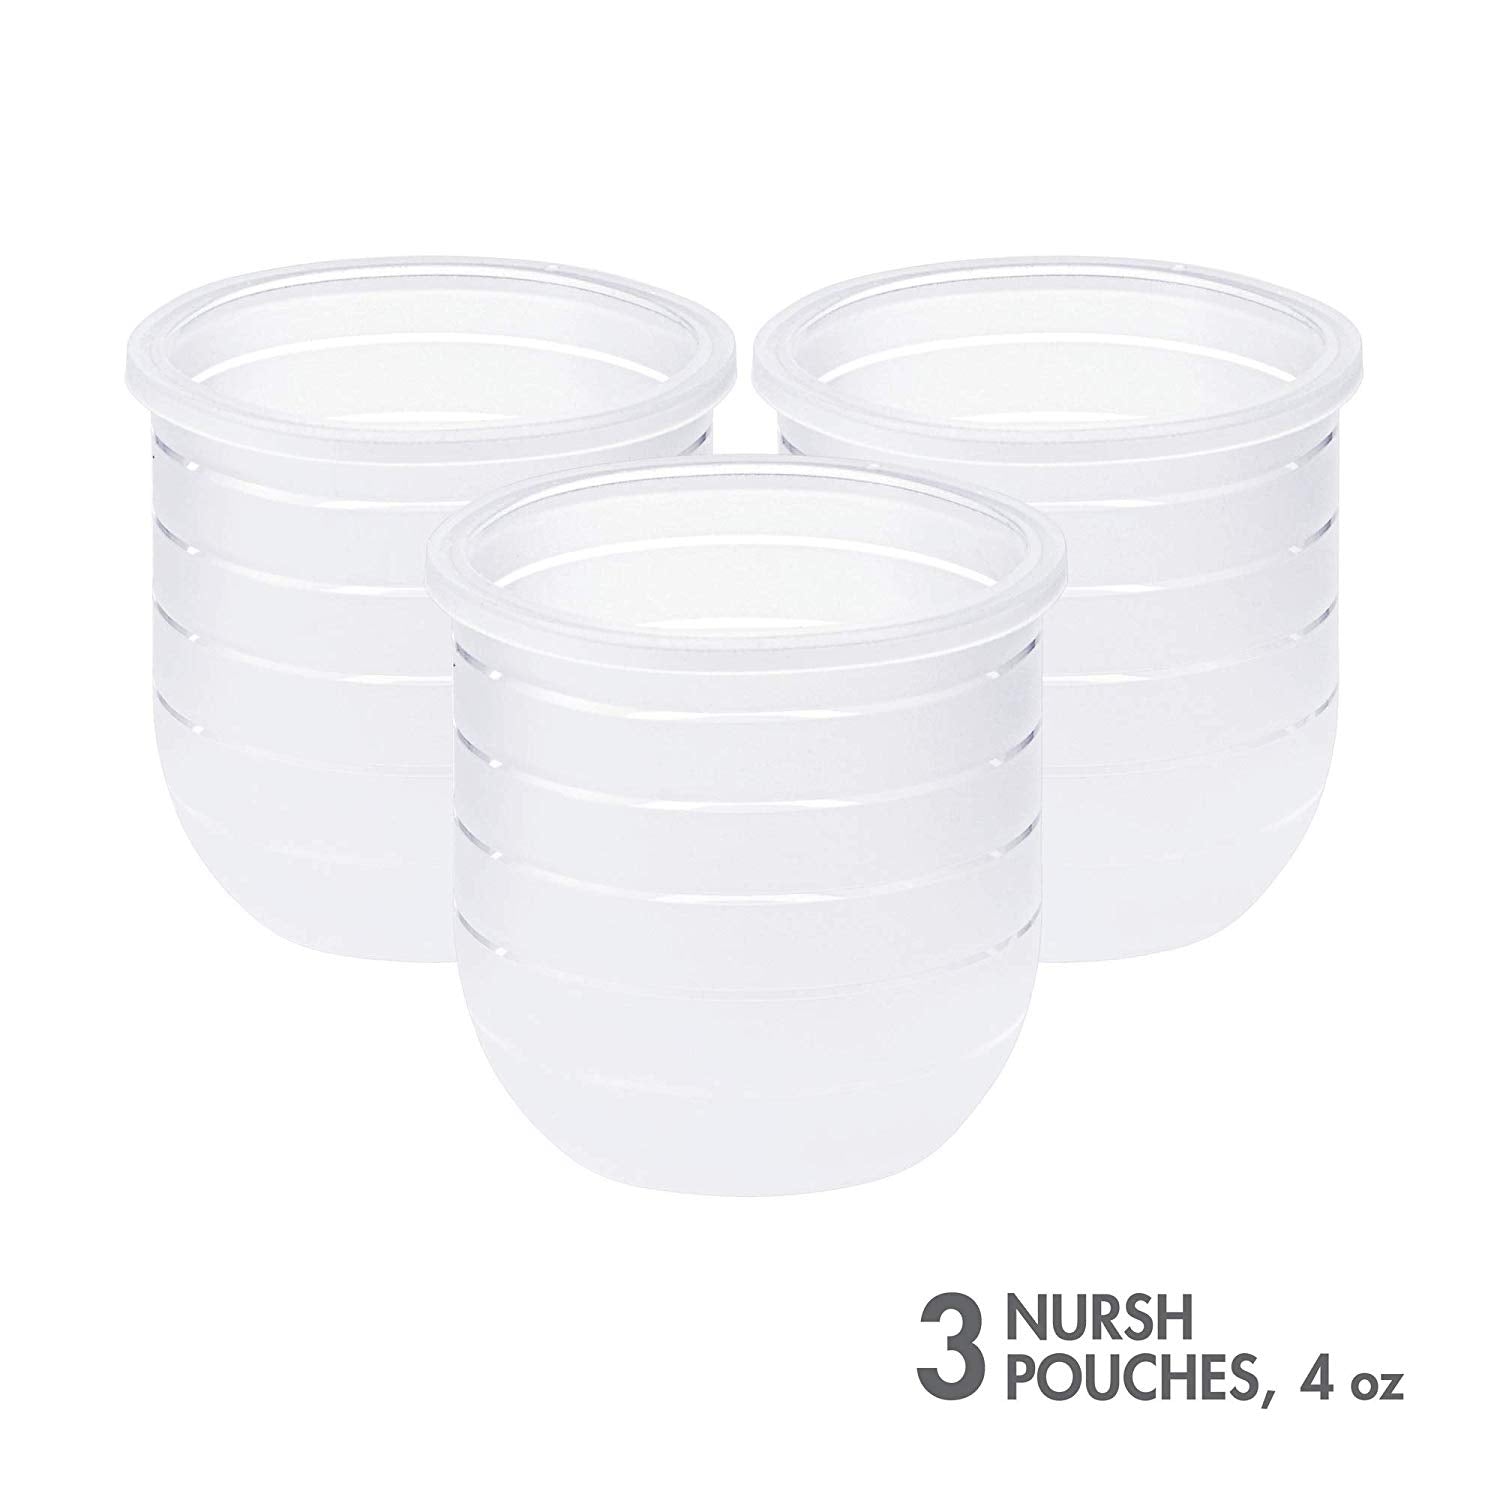 NURSH Silicone Pouches - 3 Pack